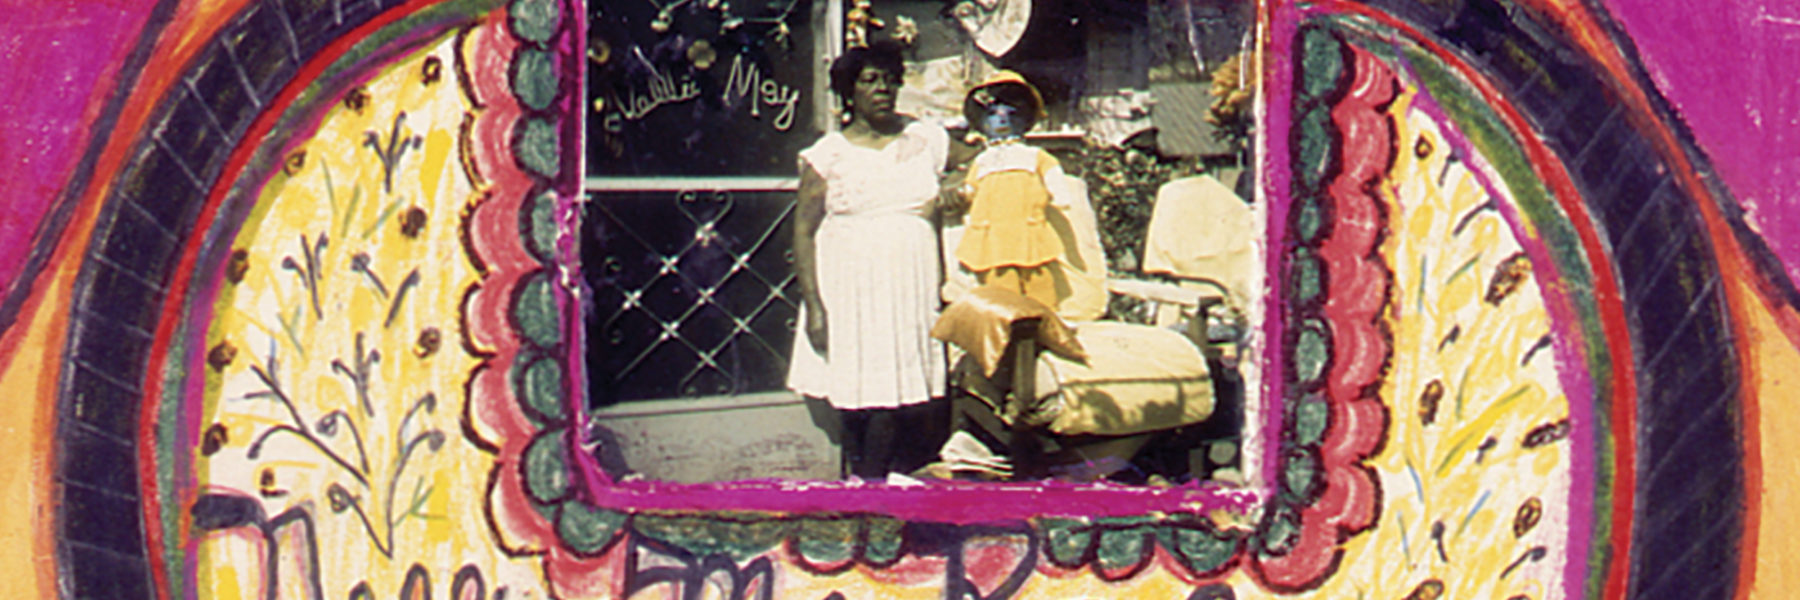 Detail of photograph within drawing of heart against a pink and yellow background with black and red outlines. The photo is decorated around the edges with pink, red, and green. The photo features Nellie Mae Rowe in a light dress standing in front of a screen door. She stands next to a padded chair, holding a doll dressed in a gold dress and bucket hat. The artist's signature is written in cursive below the photo.